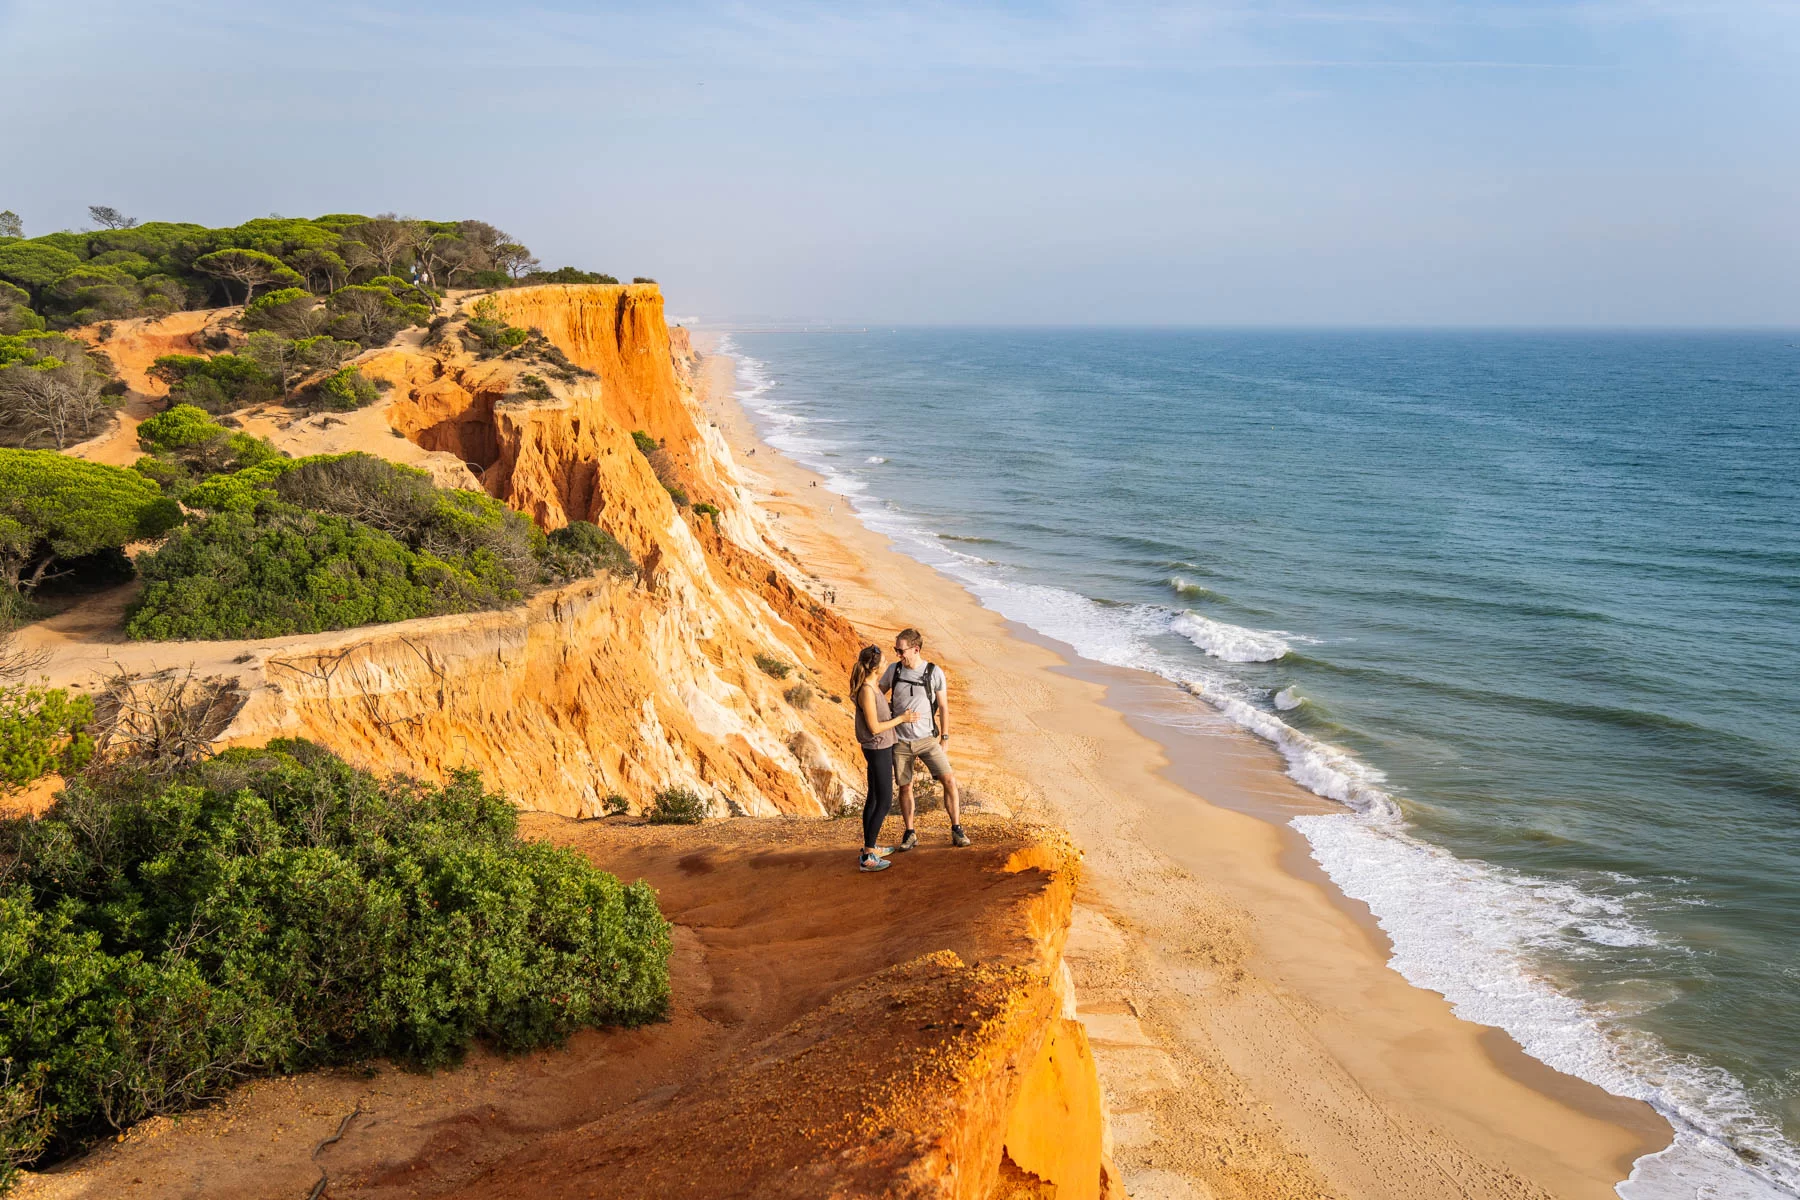 The best hikes in the Algarve via @placeswithoutdoors